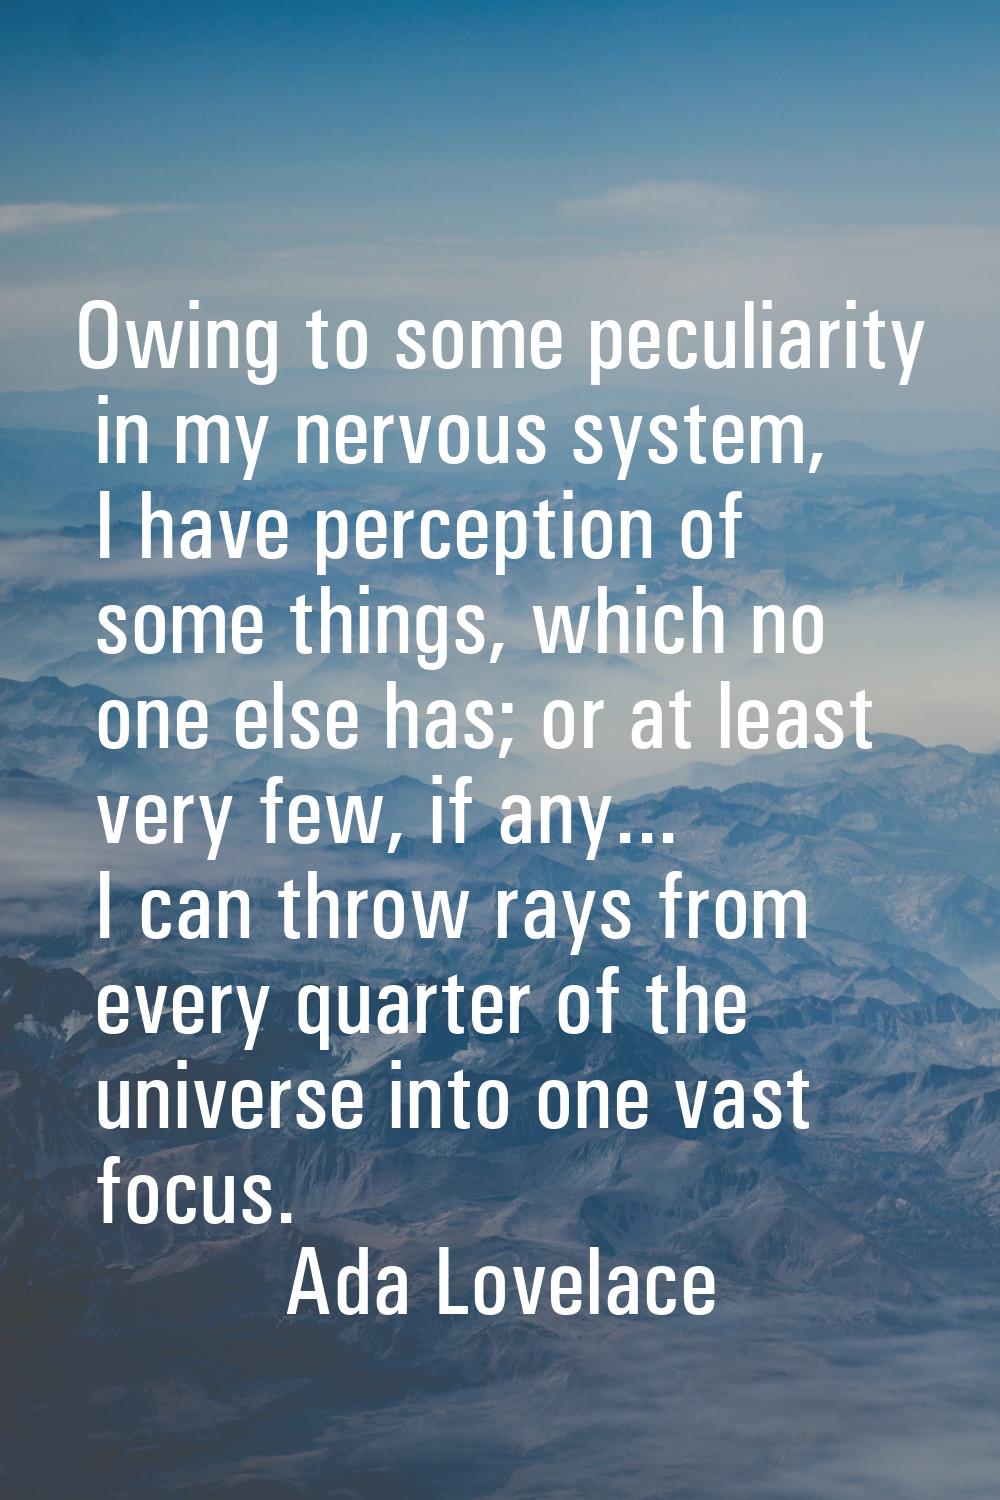 Owing to some peculiarity in my nervous system, I have perception of some things, which no one else